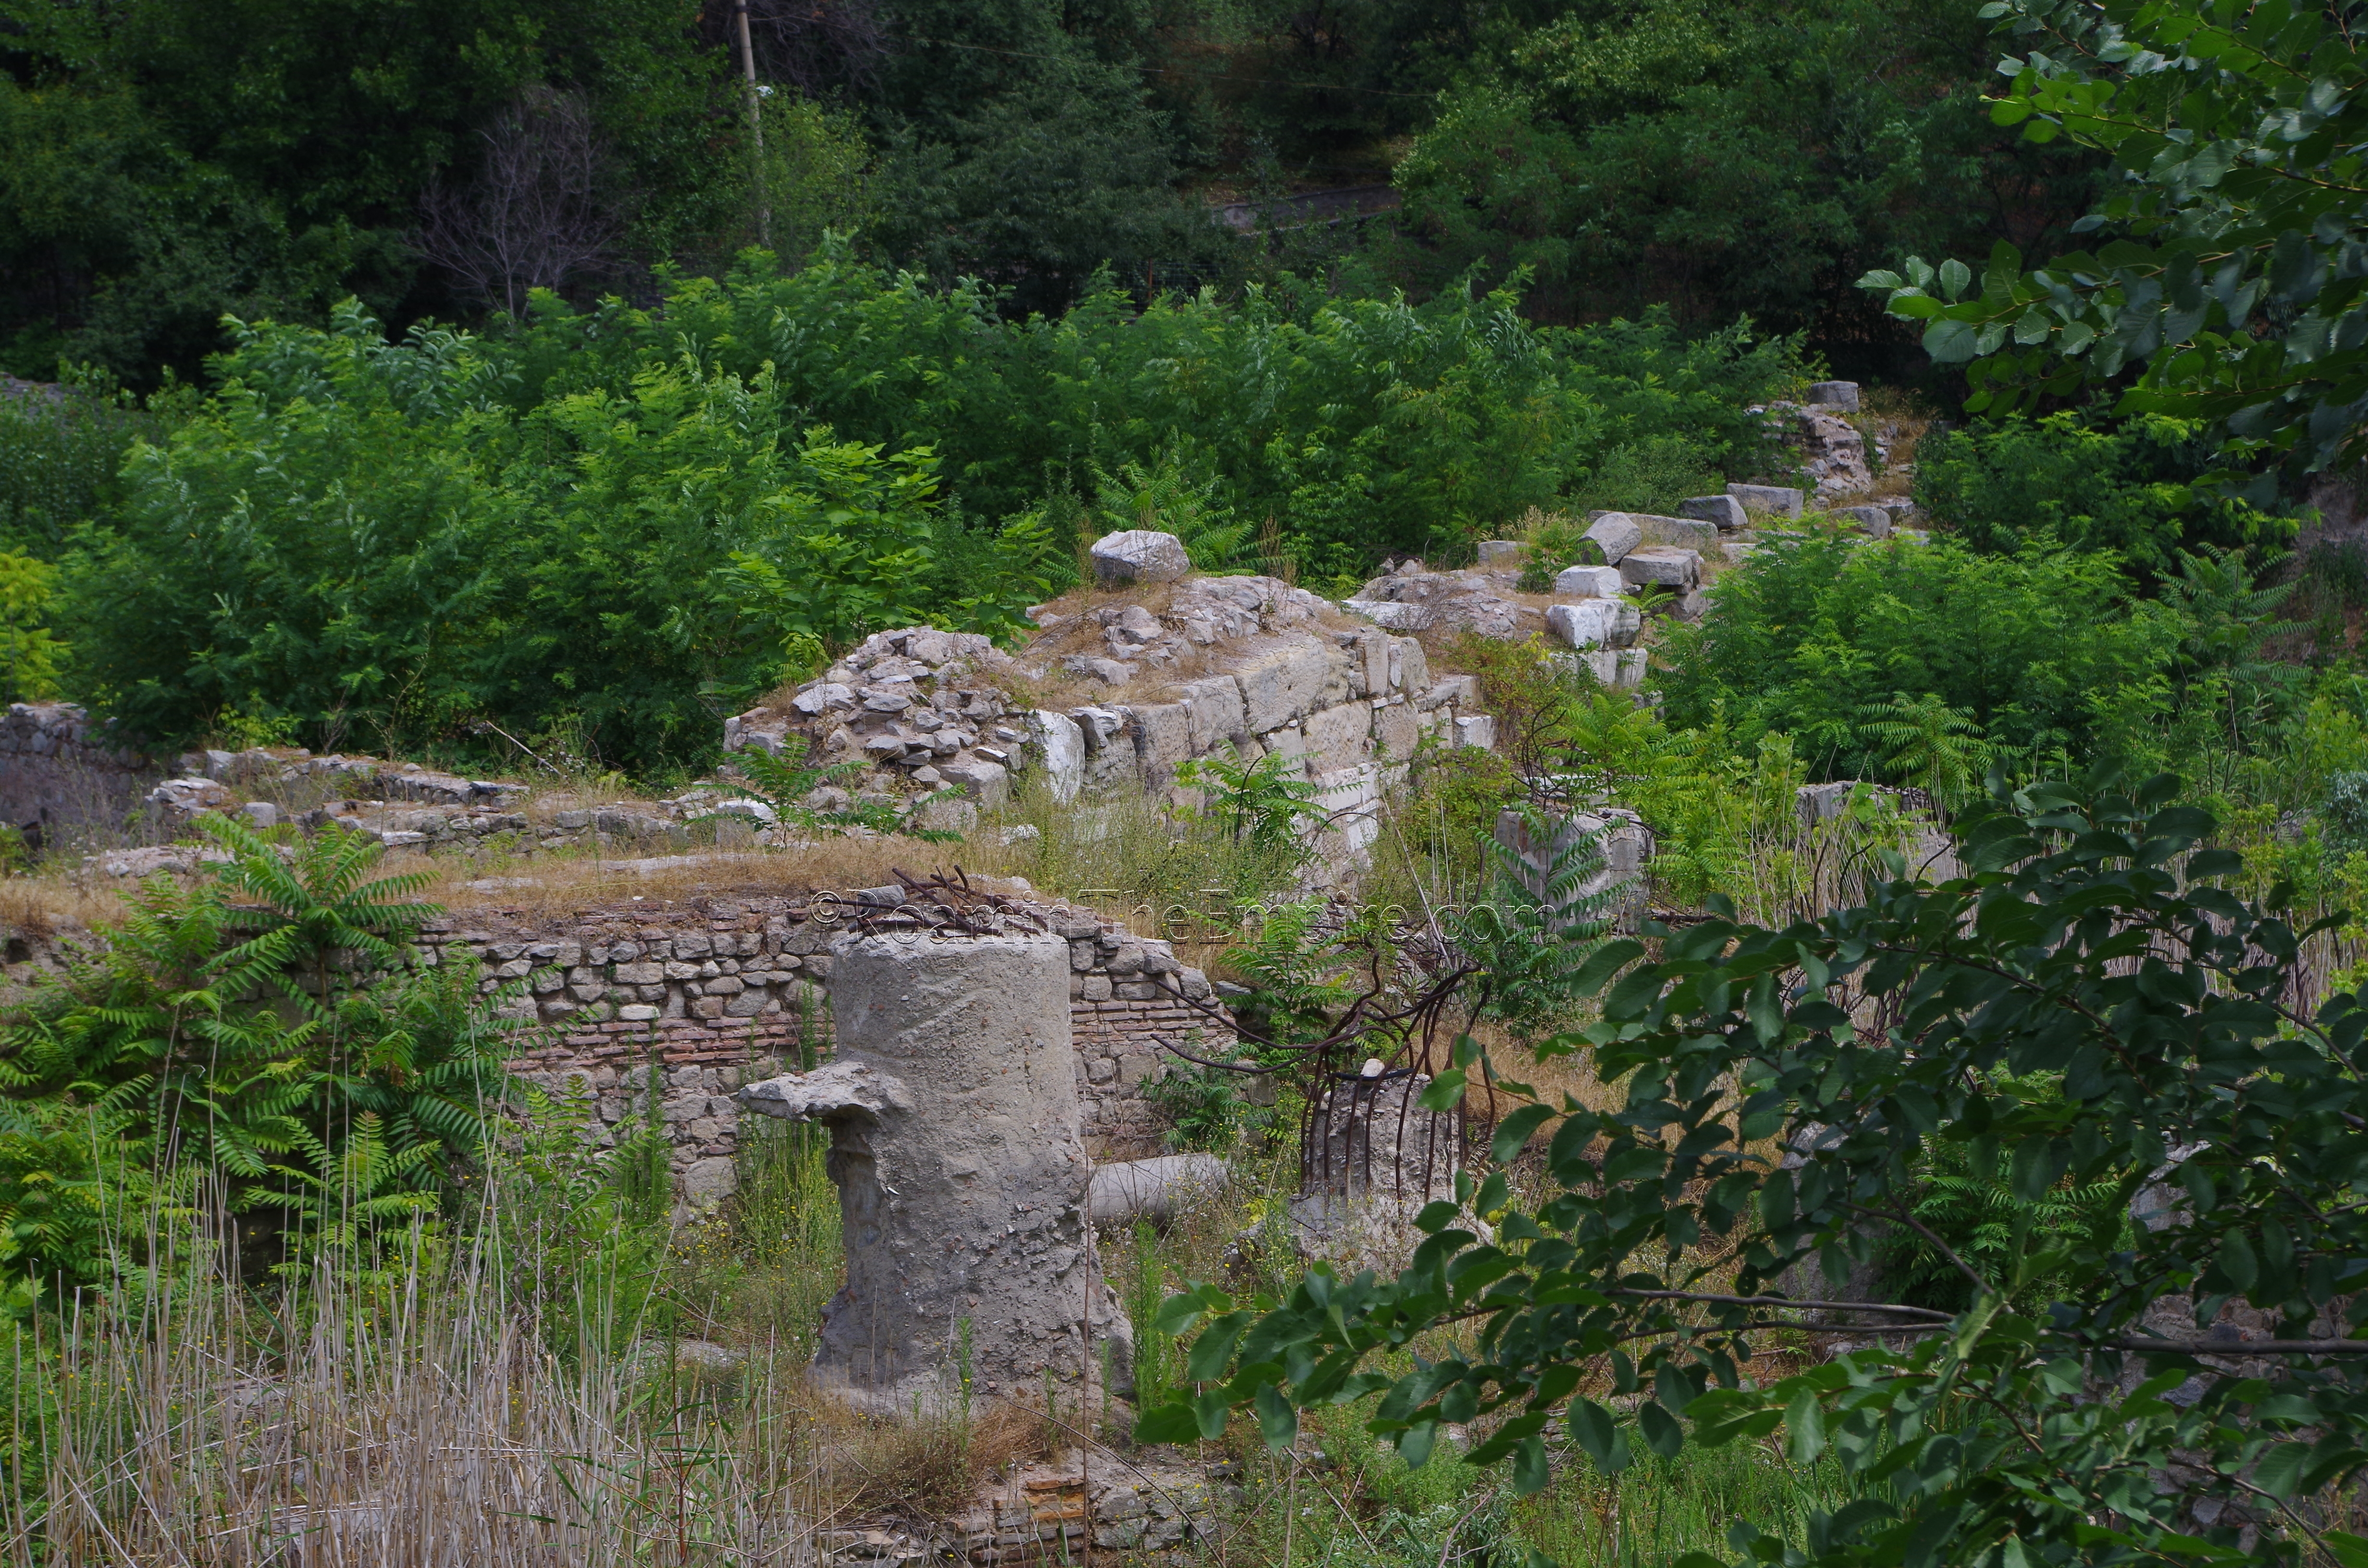 Excavated by inaccessible area near the Great Basilica, containing stretch of the city walls.